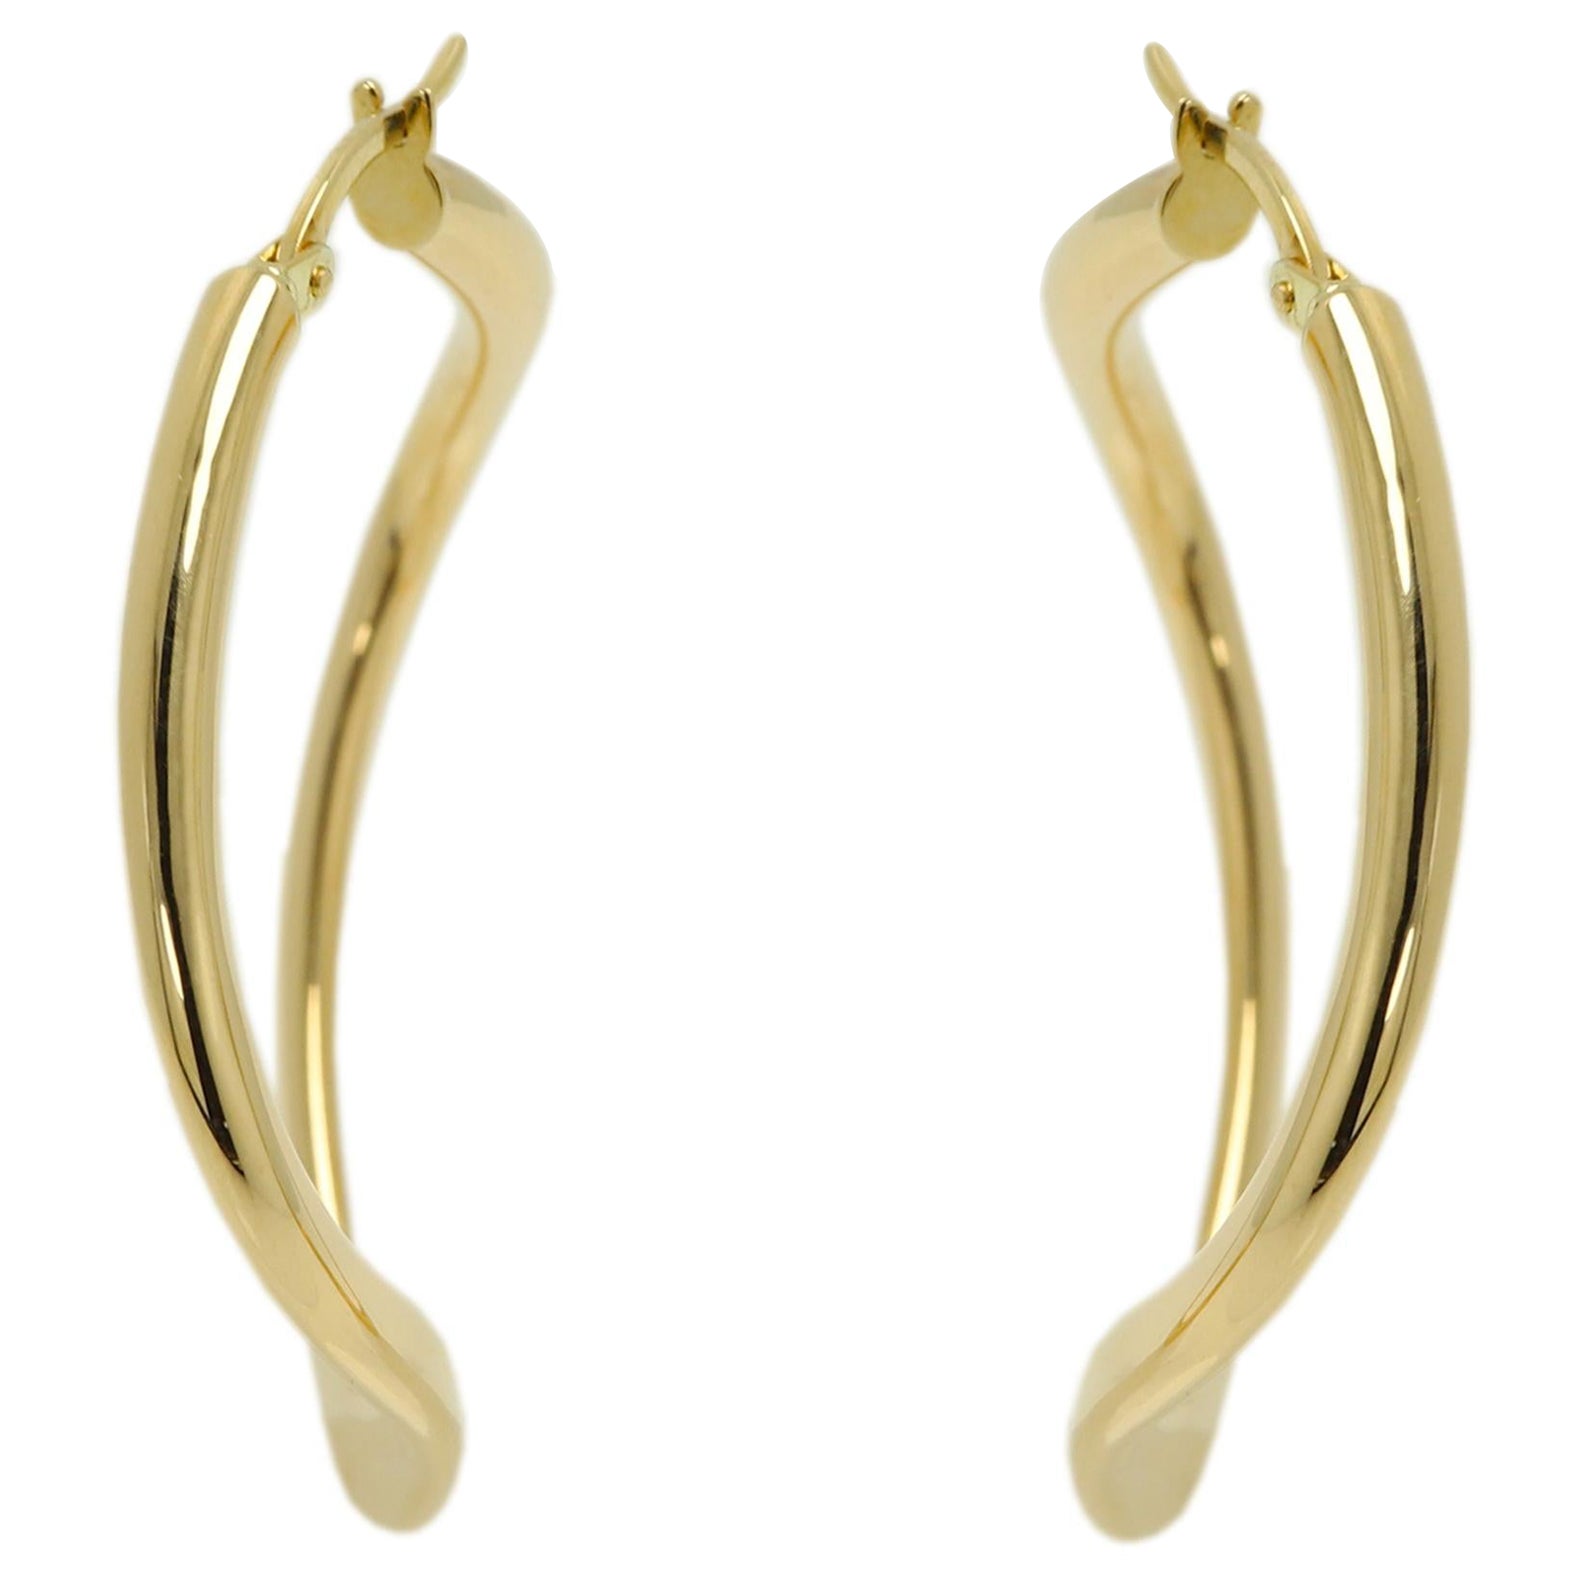 Made in Italy
Popular trendy Gold Hoops 
Ultimate Swirl and Curvy Shape - see the video
weight is 5.13 grams total.
14k Yellow Gold.
approx size: 35 mm
Standard Latch Back.
+Gift Box
(#5.13gr)